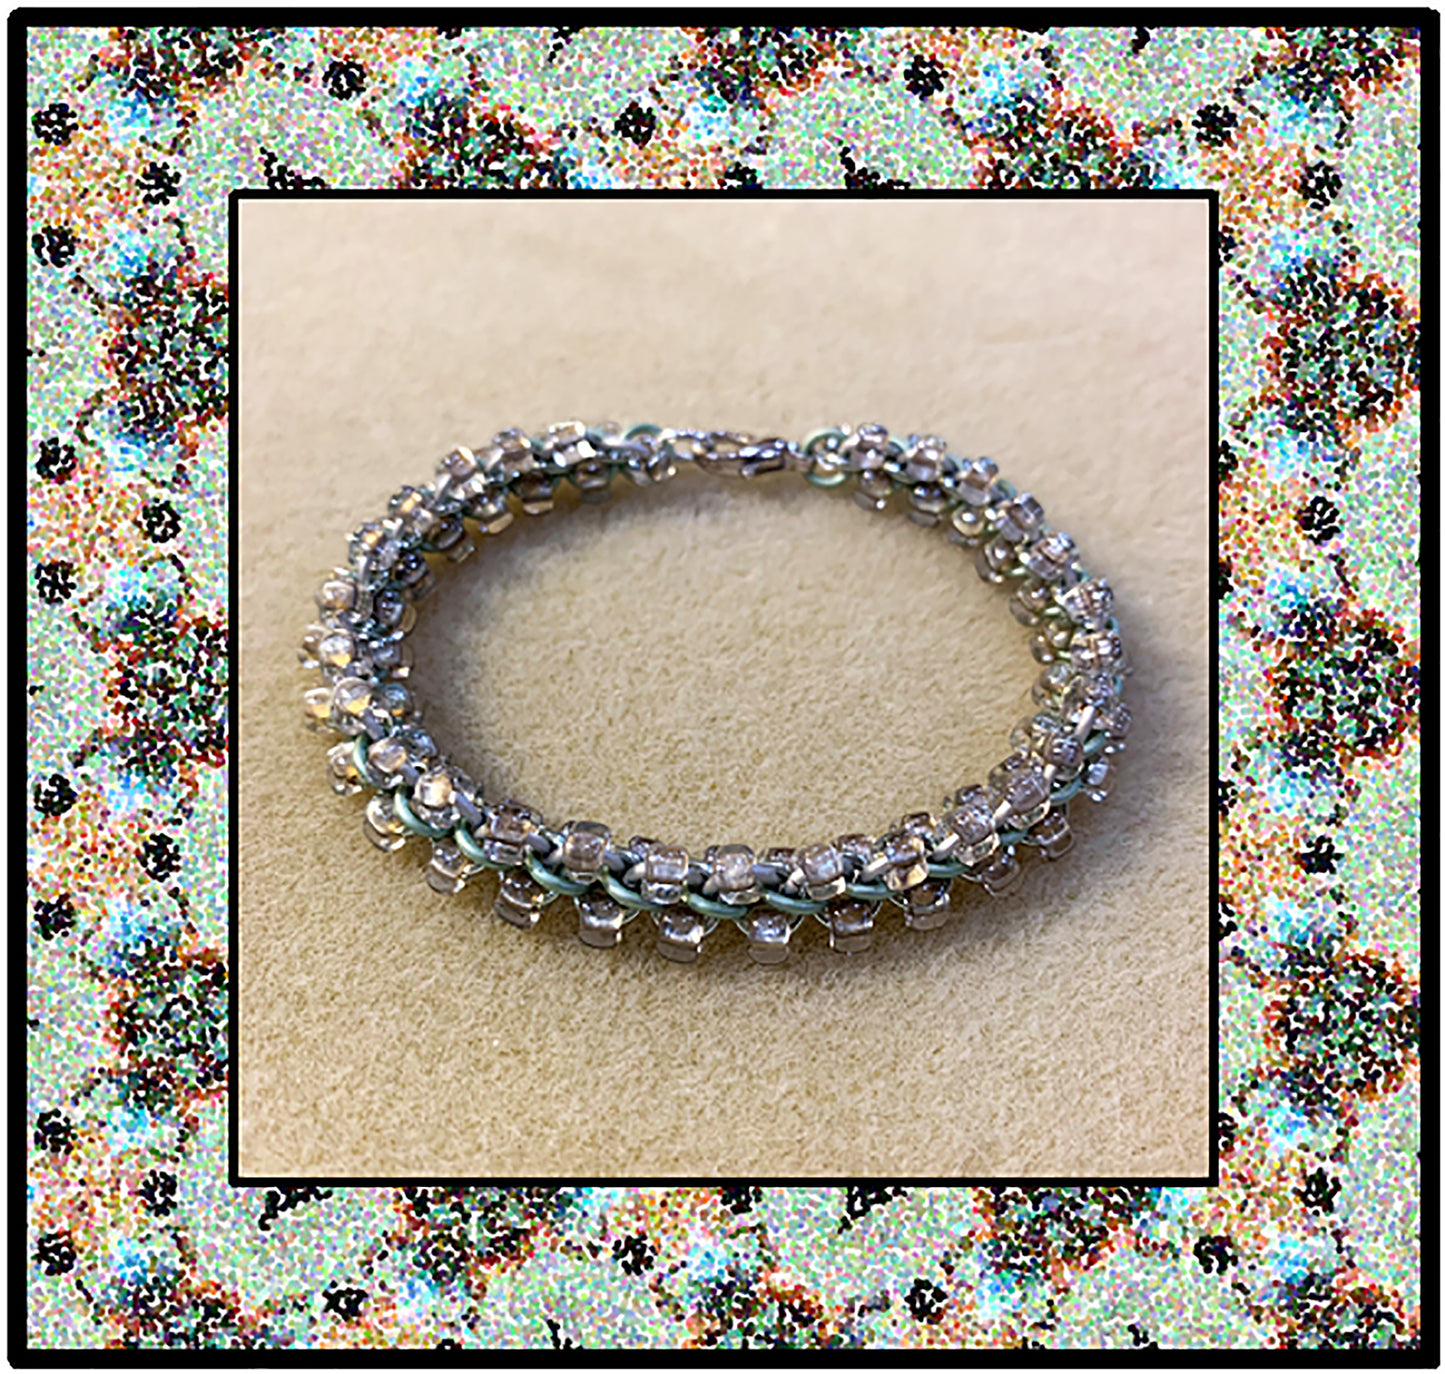 Jens Pind with Triangle Beads Bracelet Kit and Video Class Champagne Sea Foam and Silver